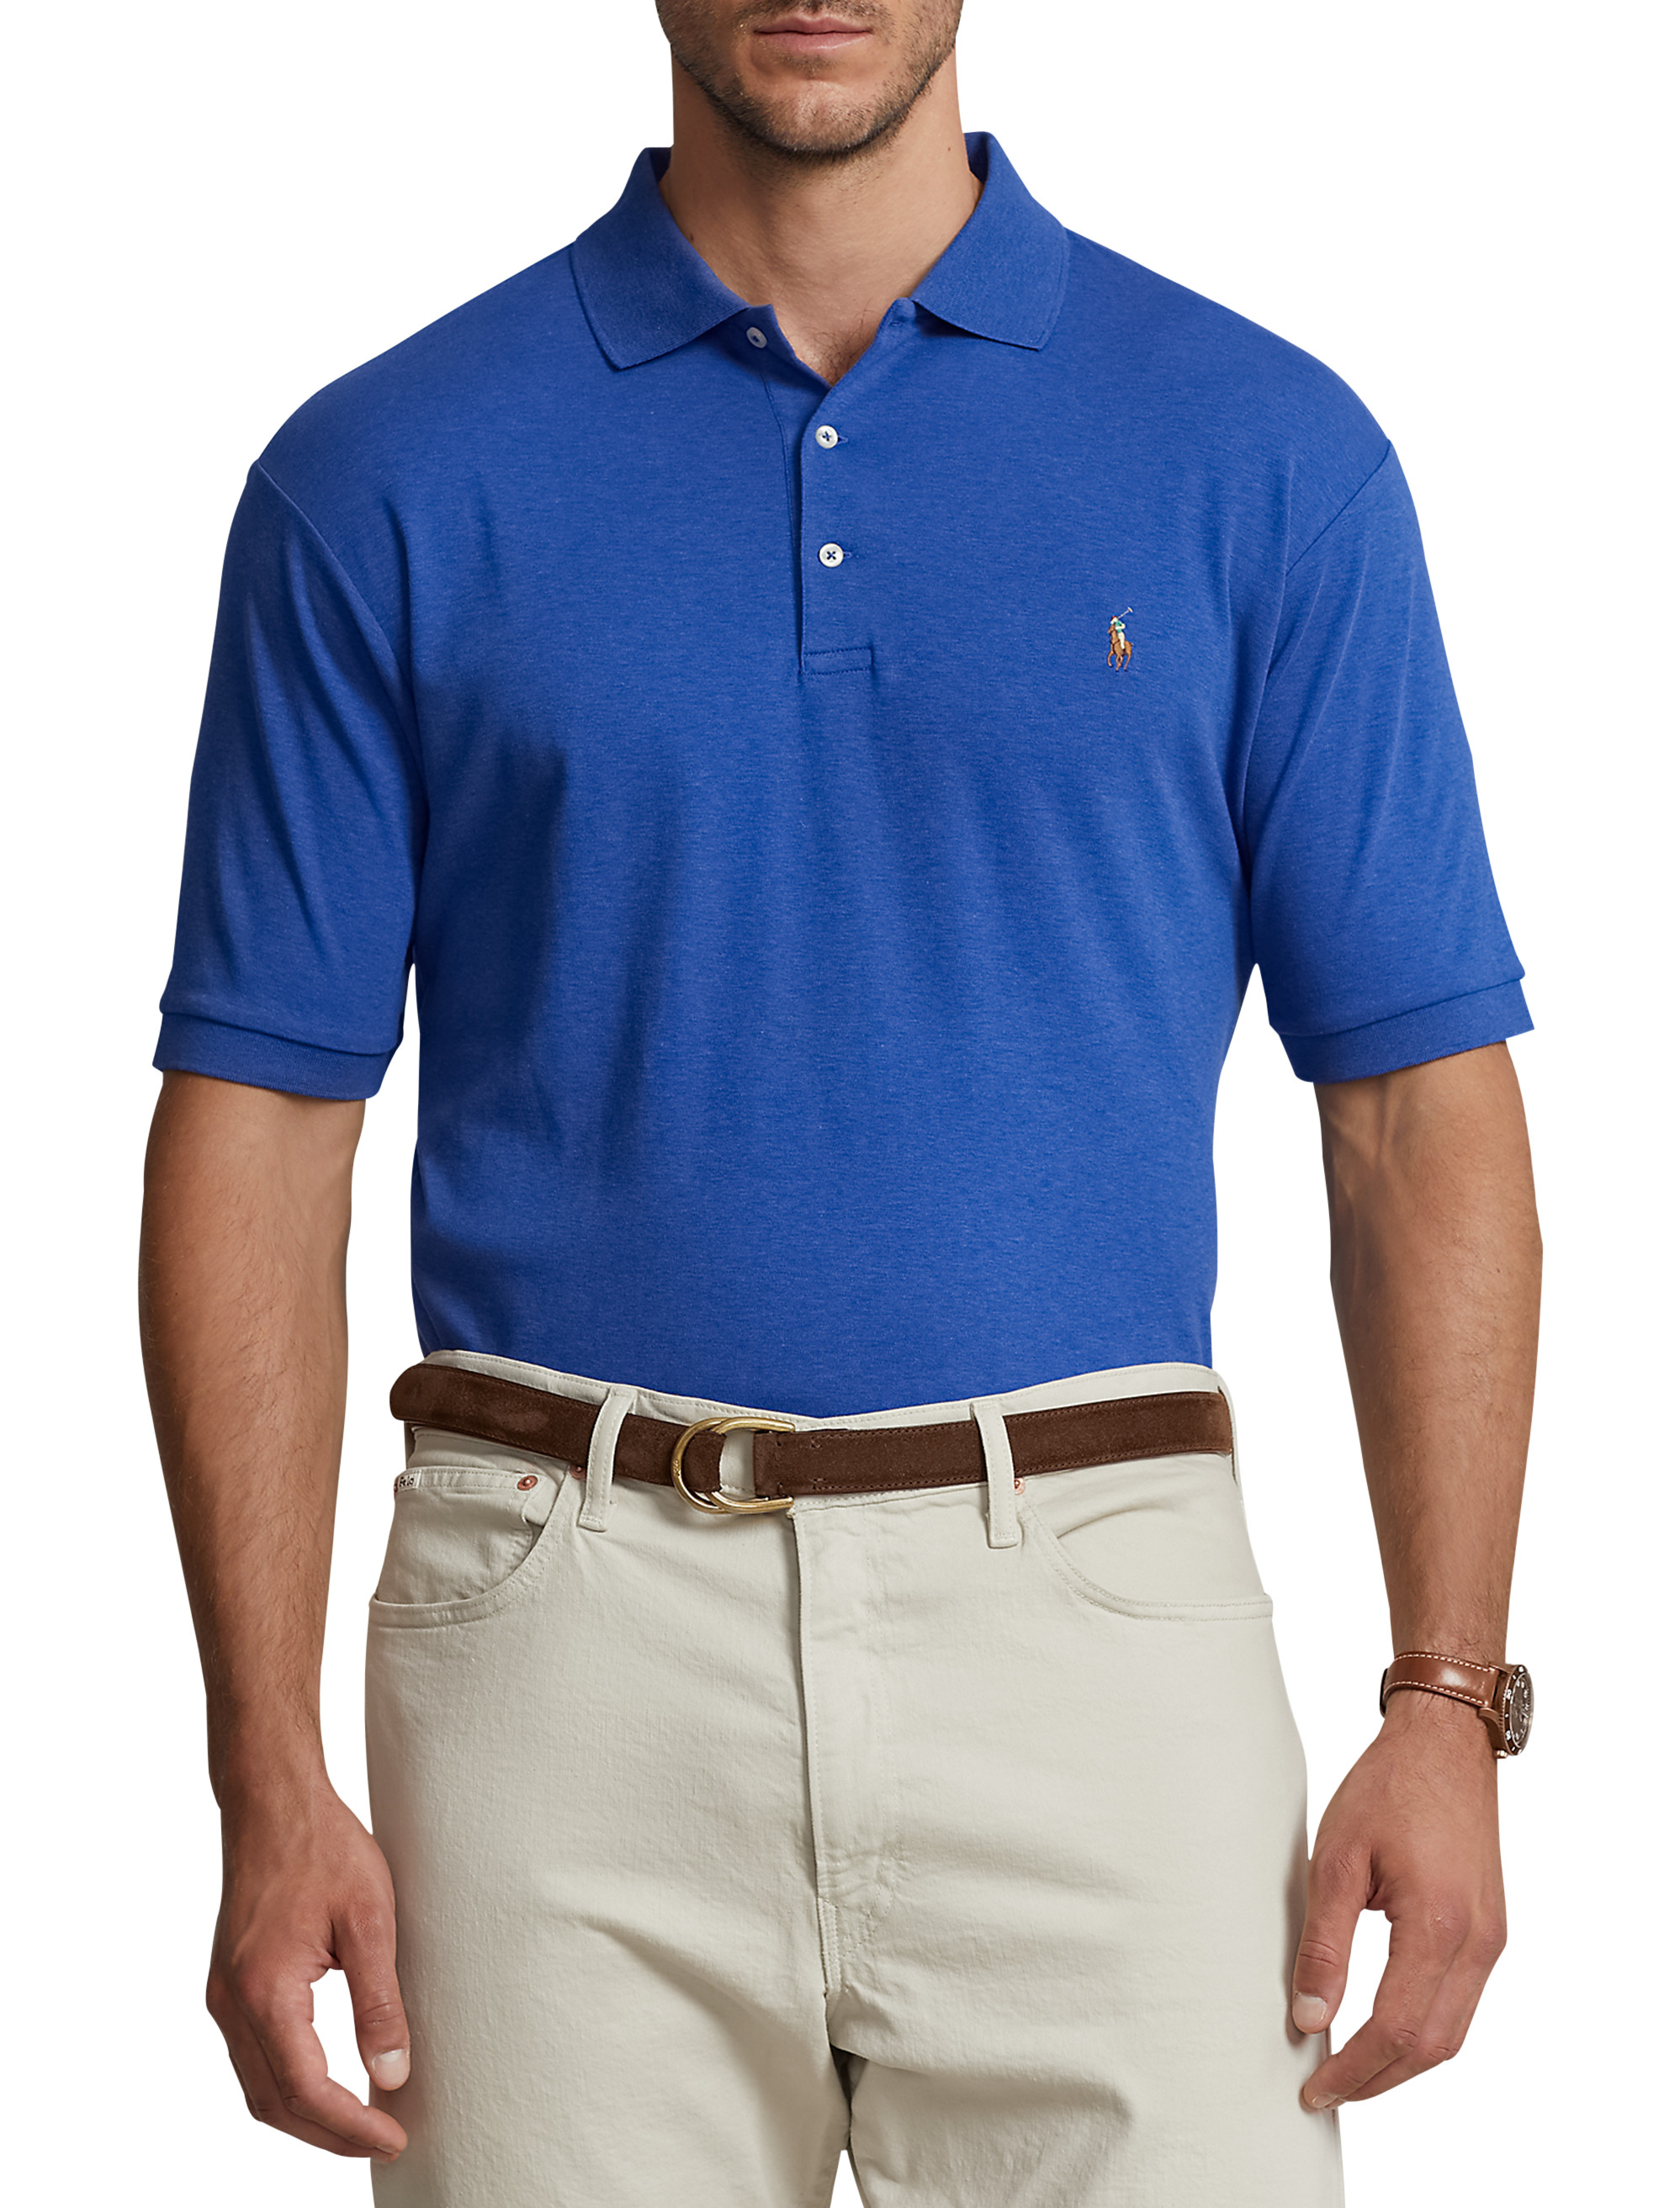 polo ralph lauren outlet big and tall